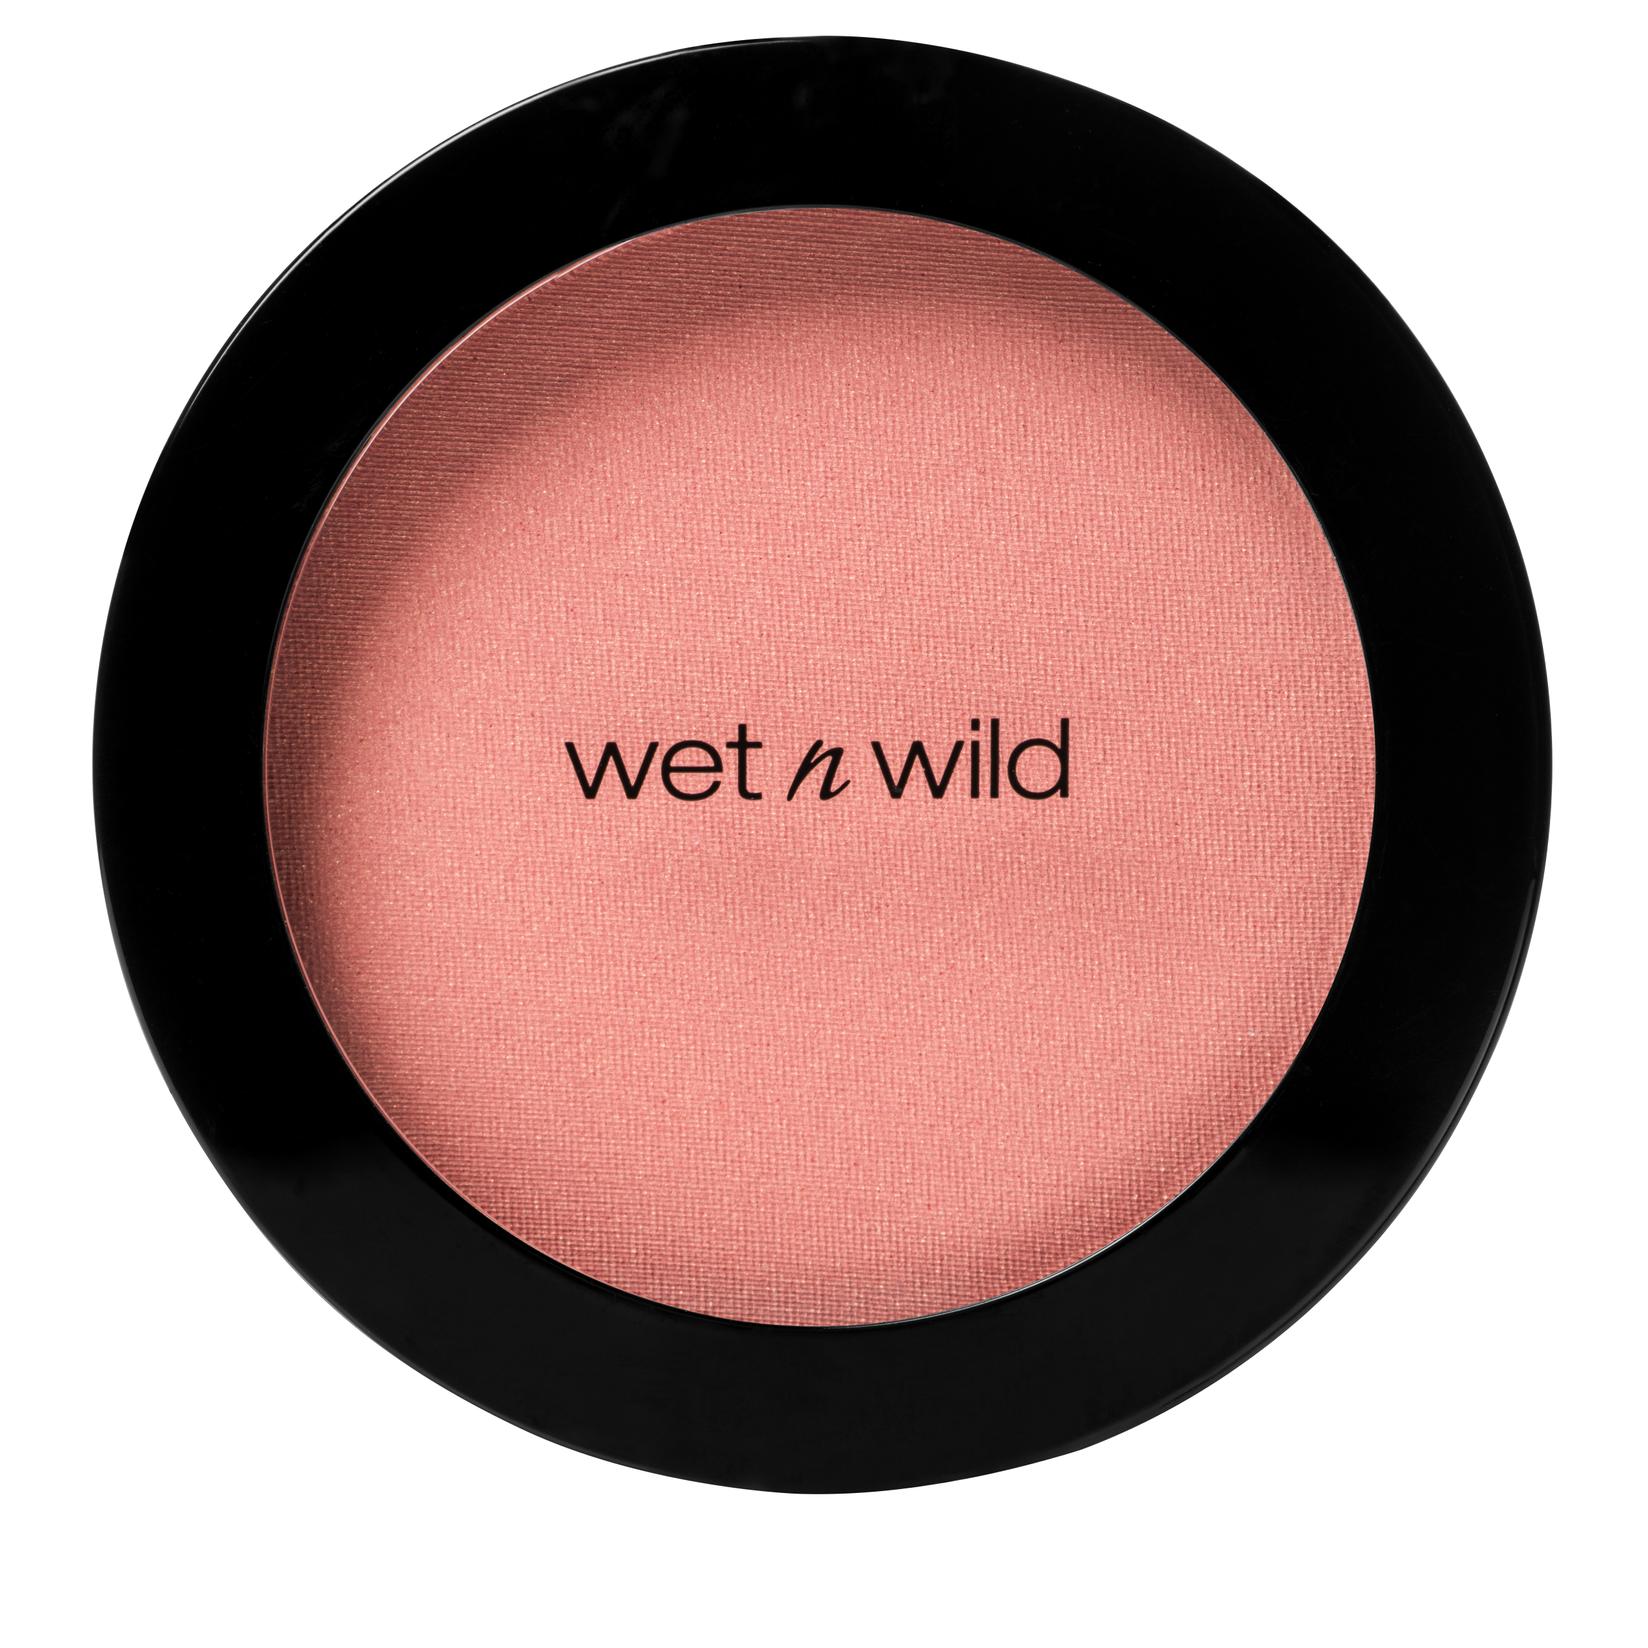 Selected image for wet n wild coloricon Rumenilo, 1111557E Pinch me pink, 5.95 g